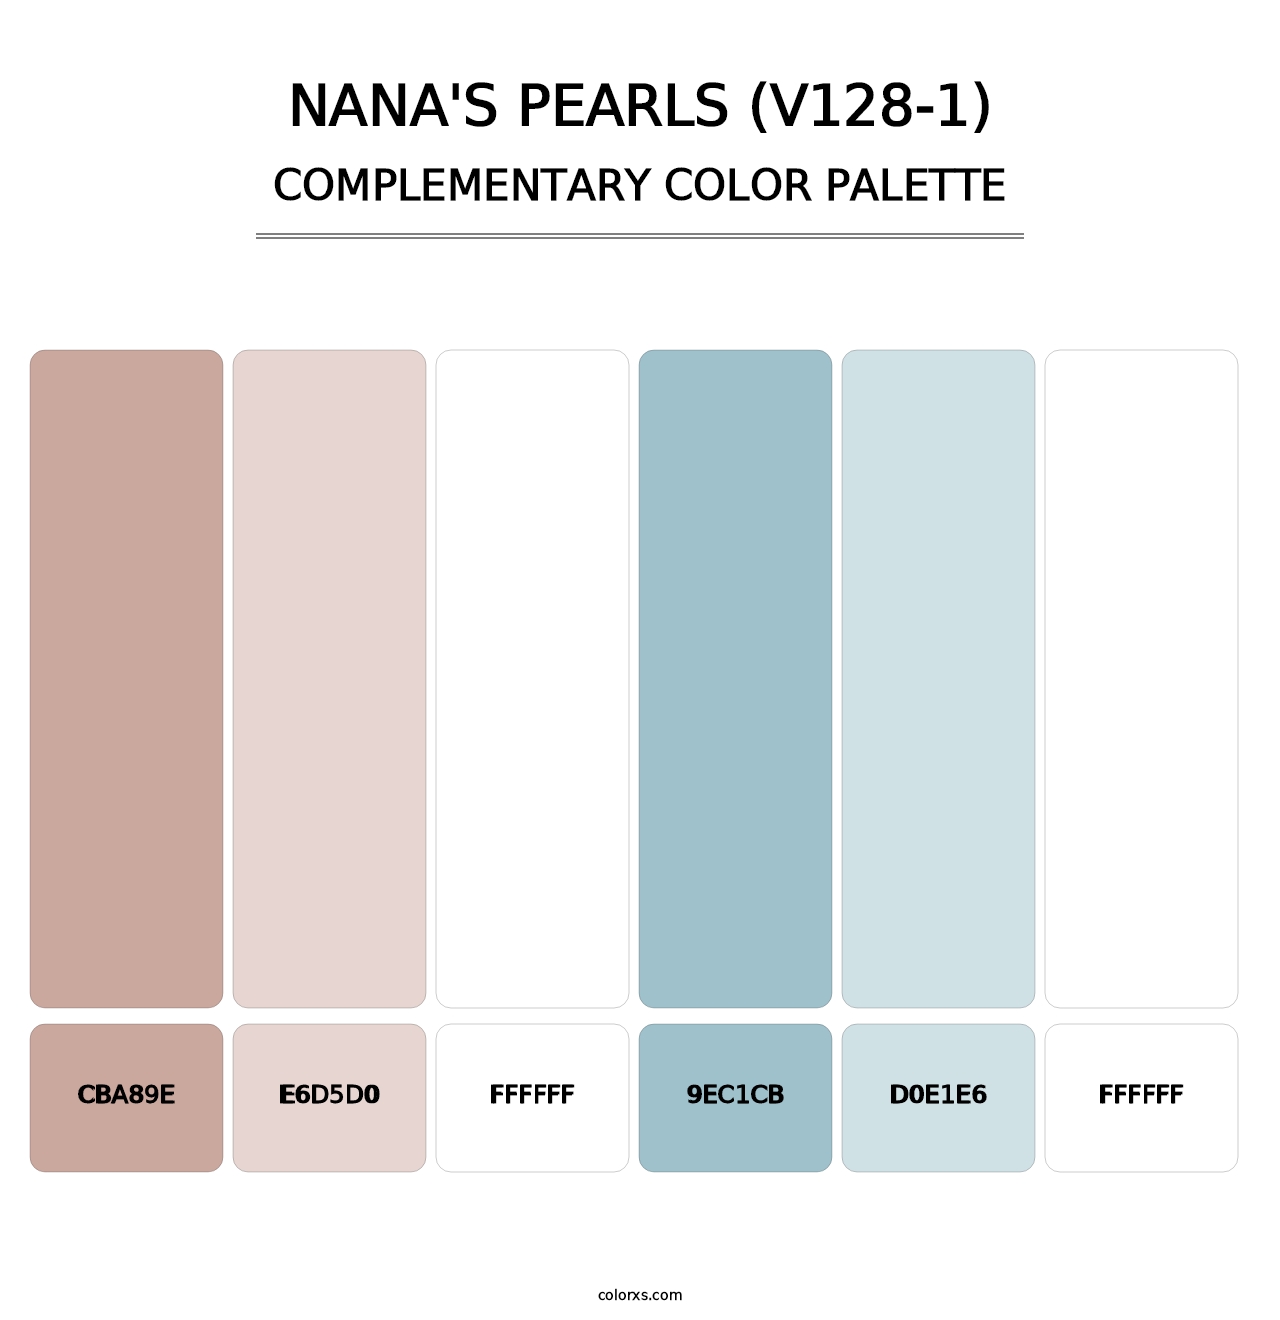 Nana's Pearls (V128-1) - Complementary Color Palette